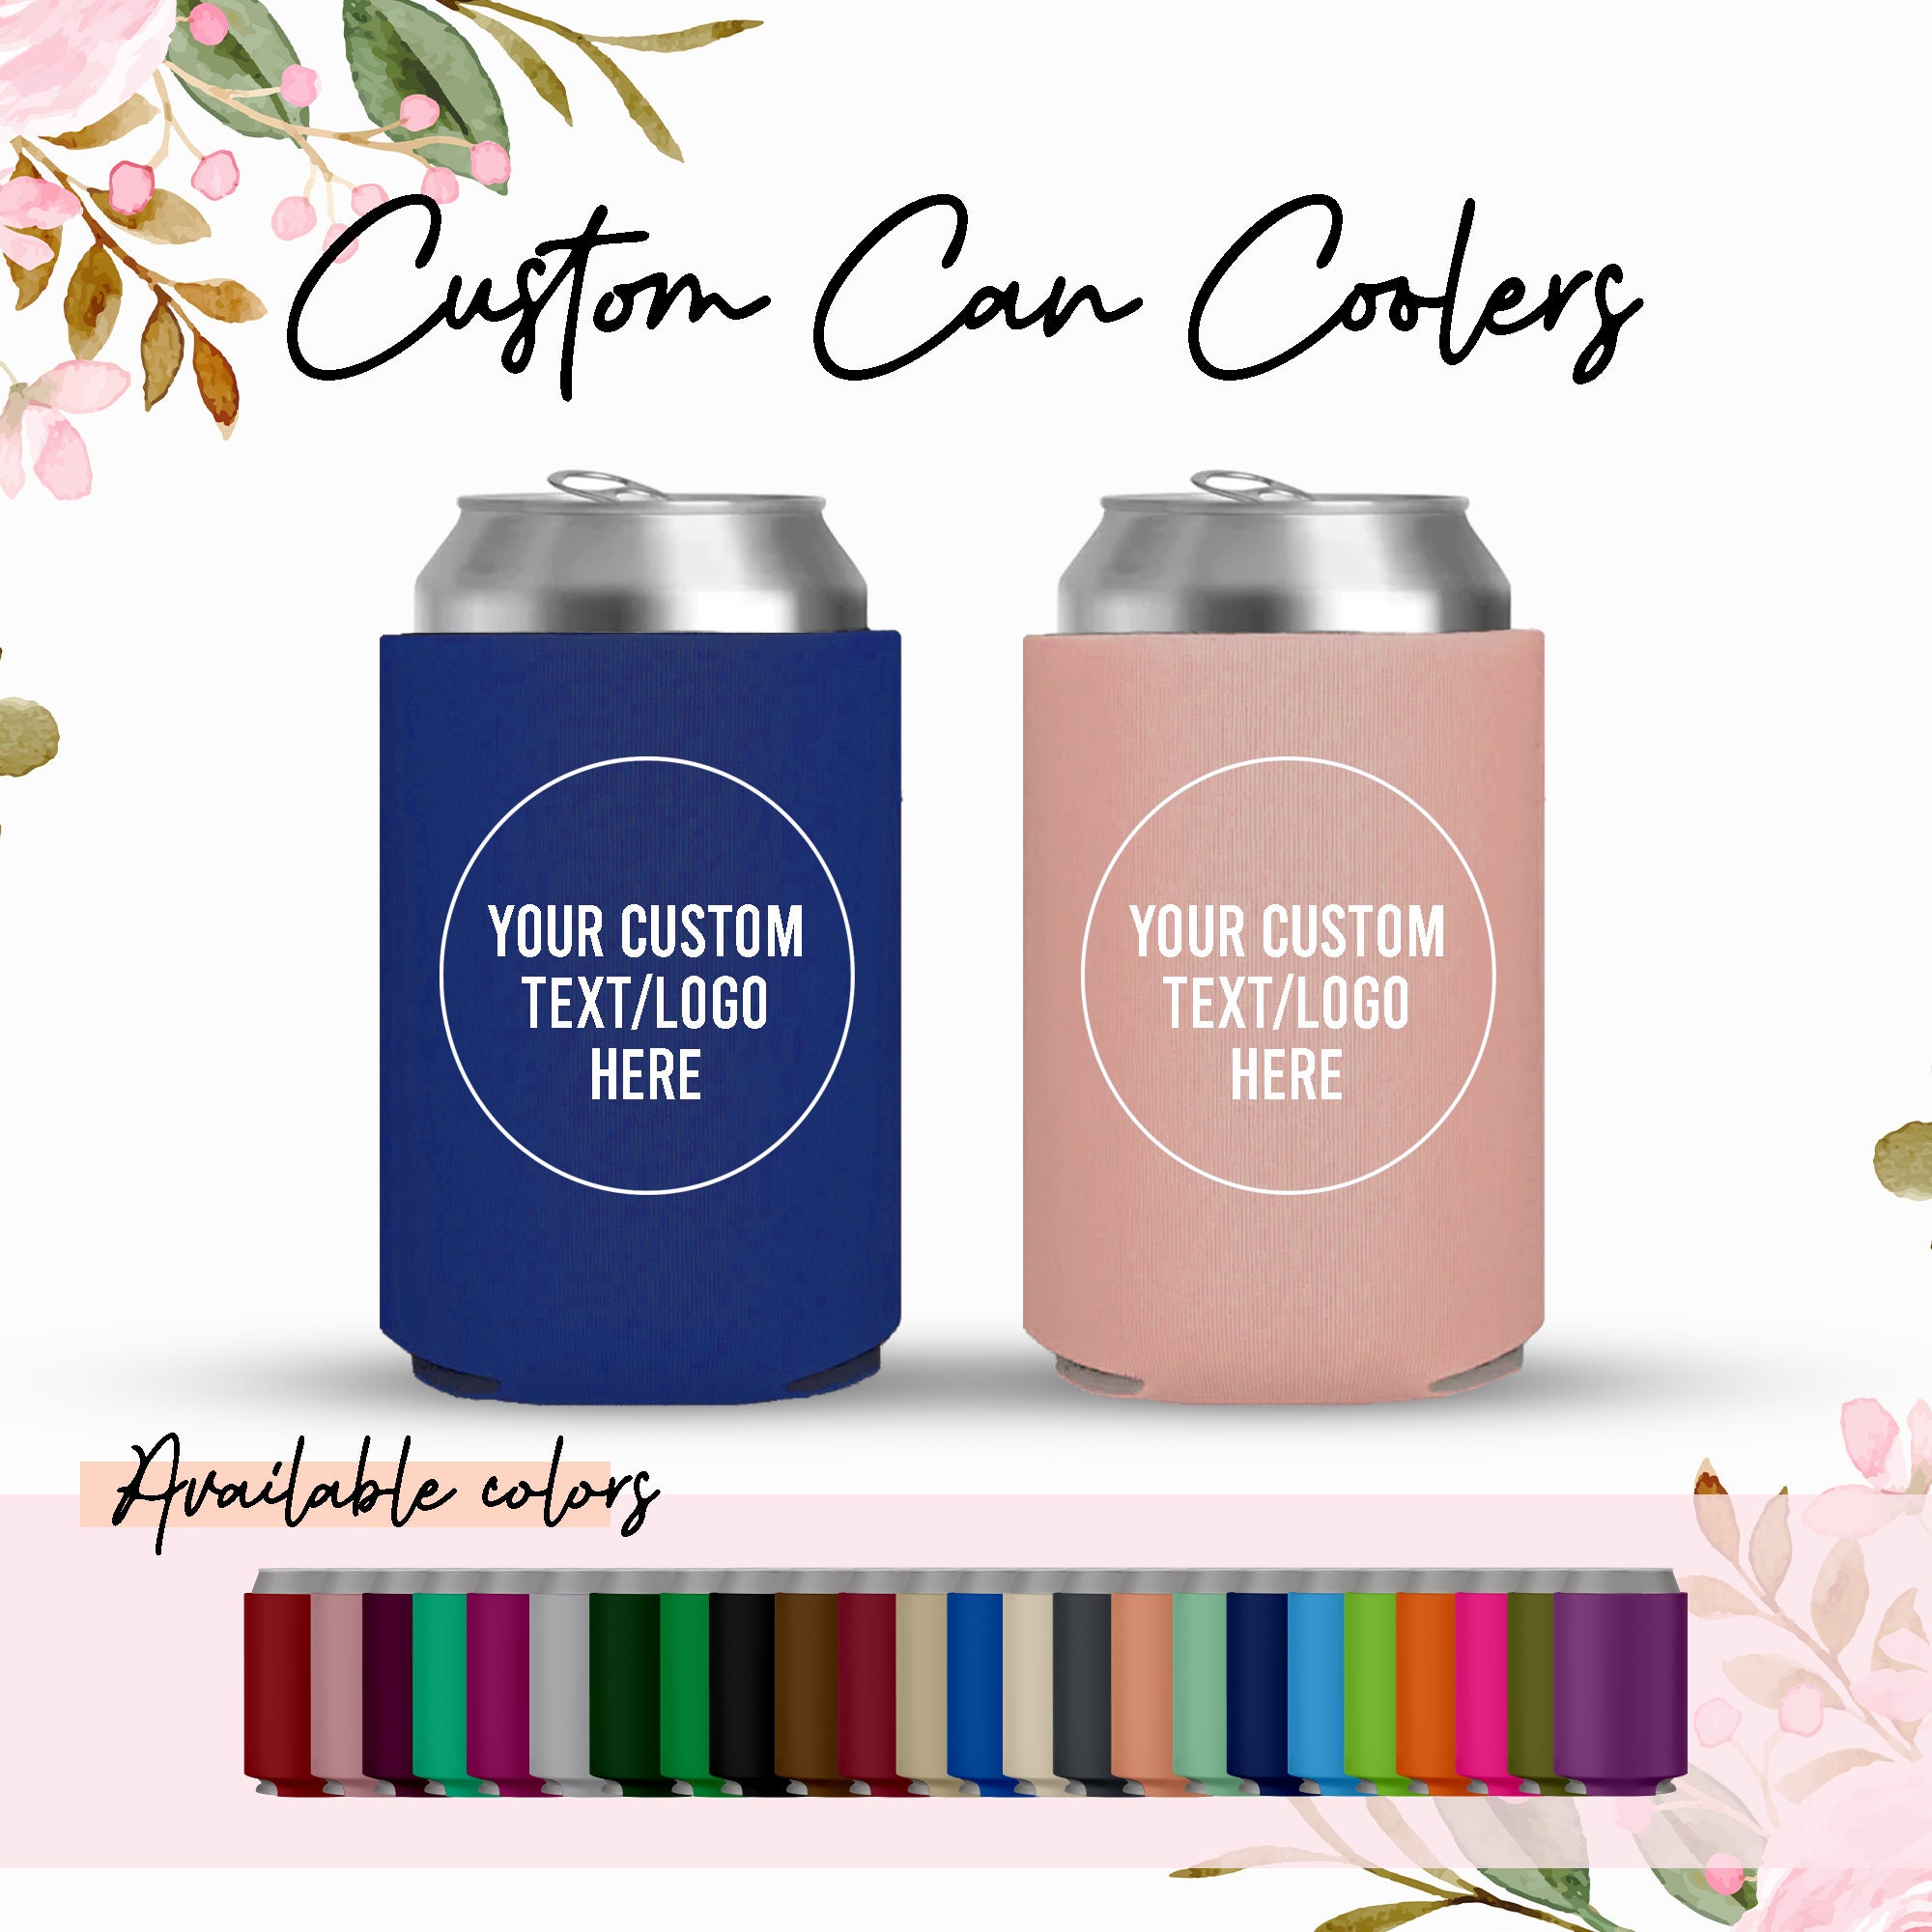 Bachelor Party Favors Stag Party Gifts Custom Can Coolers Bridal